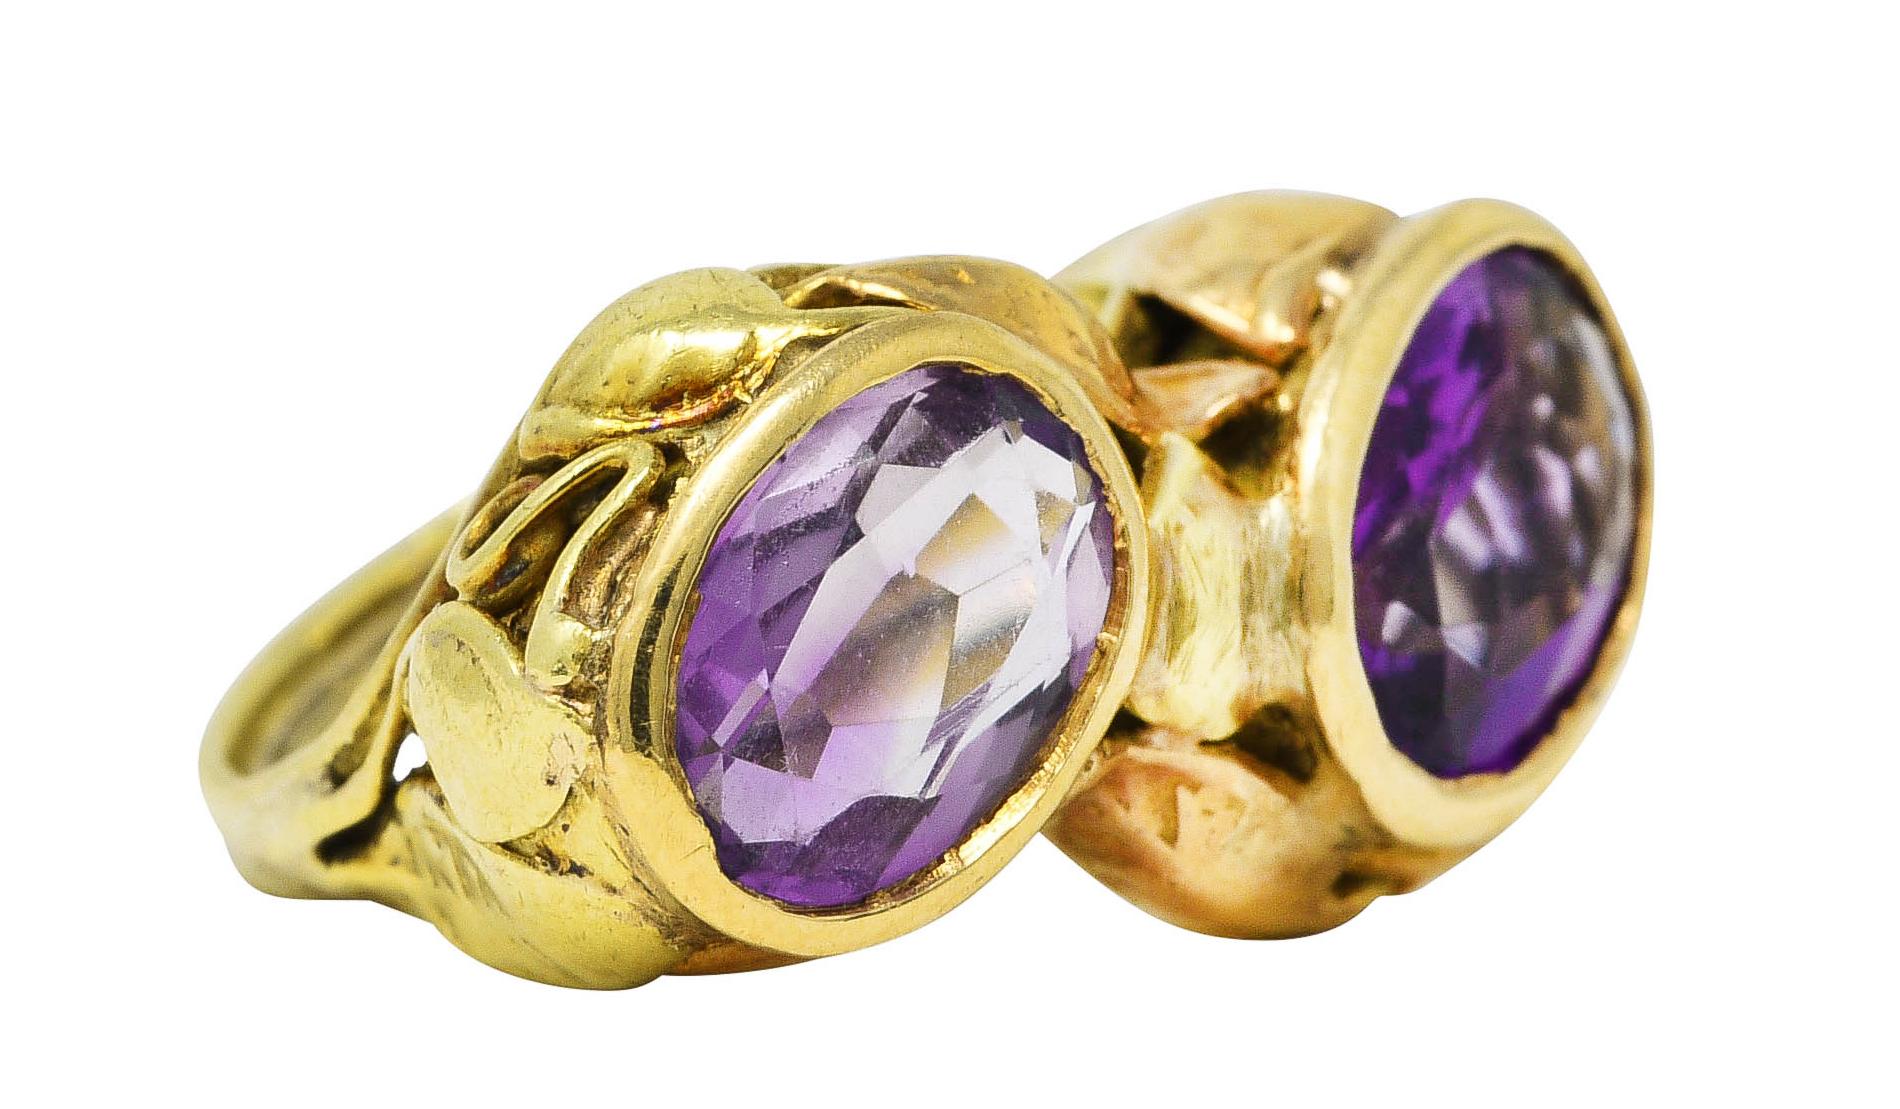 Ring features two bezel set oval cut amethysts measuring 6.4 x 9.0 mm and 6.6 x 9.2 mm. Transparent purple - one with light saturation and one with medium saturation. With highly rendered yellow and rose gold foliate surround. Tested as 14 karat